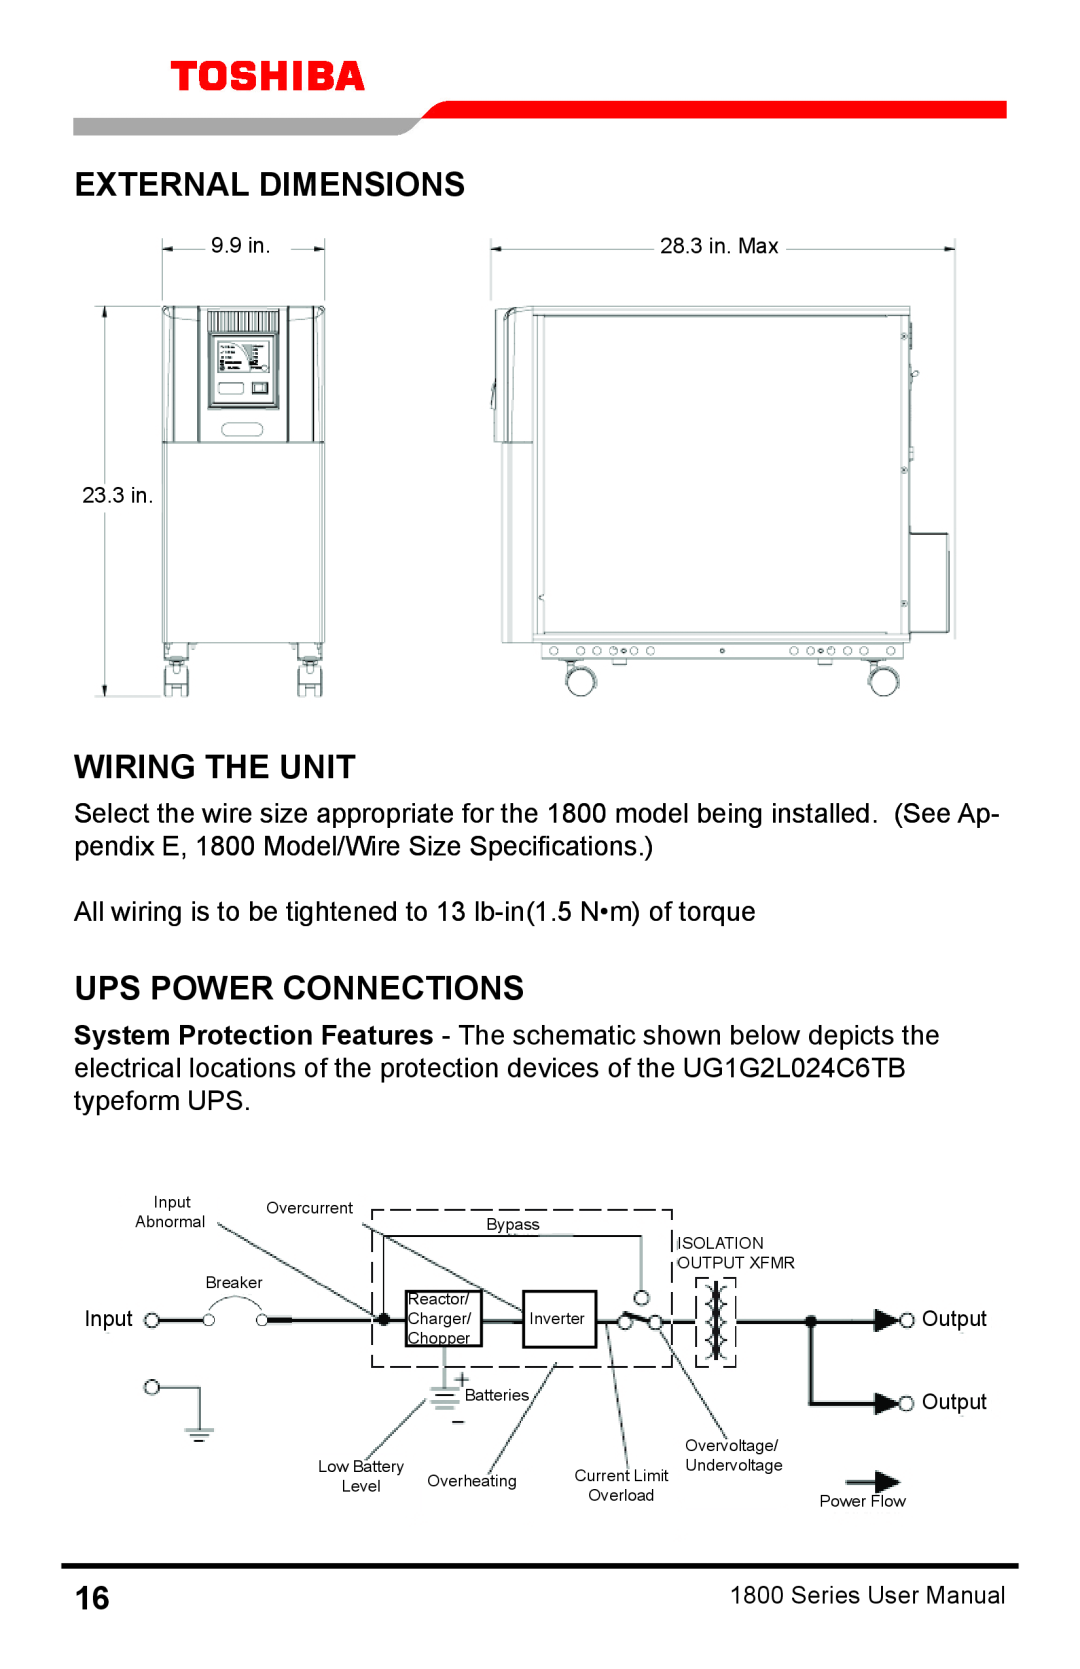 Toshiba 1800 manual External Dimensions, Wiring the Unit, UPS Power Connections 